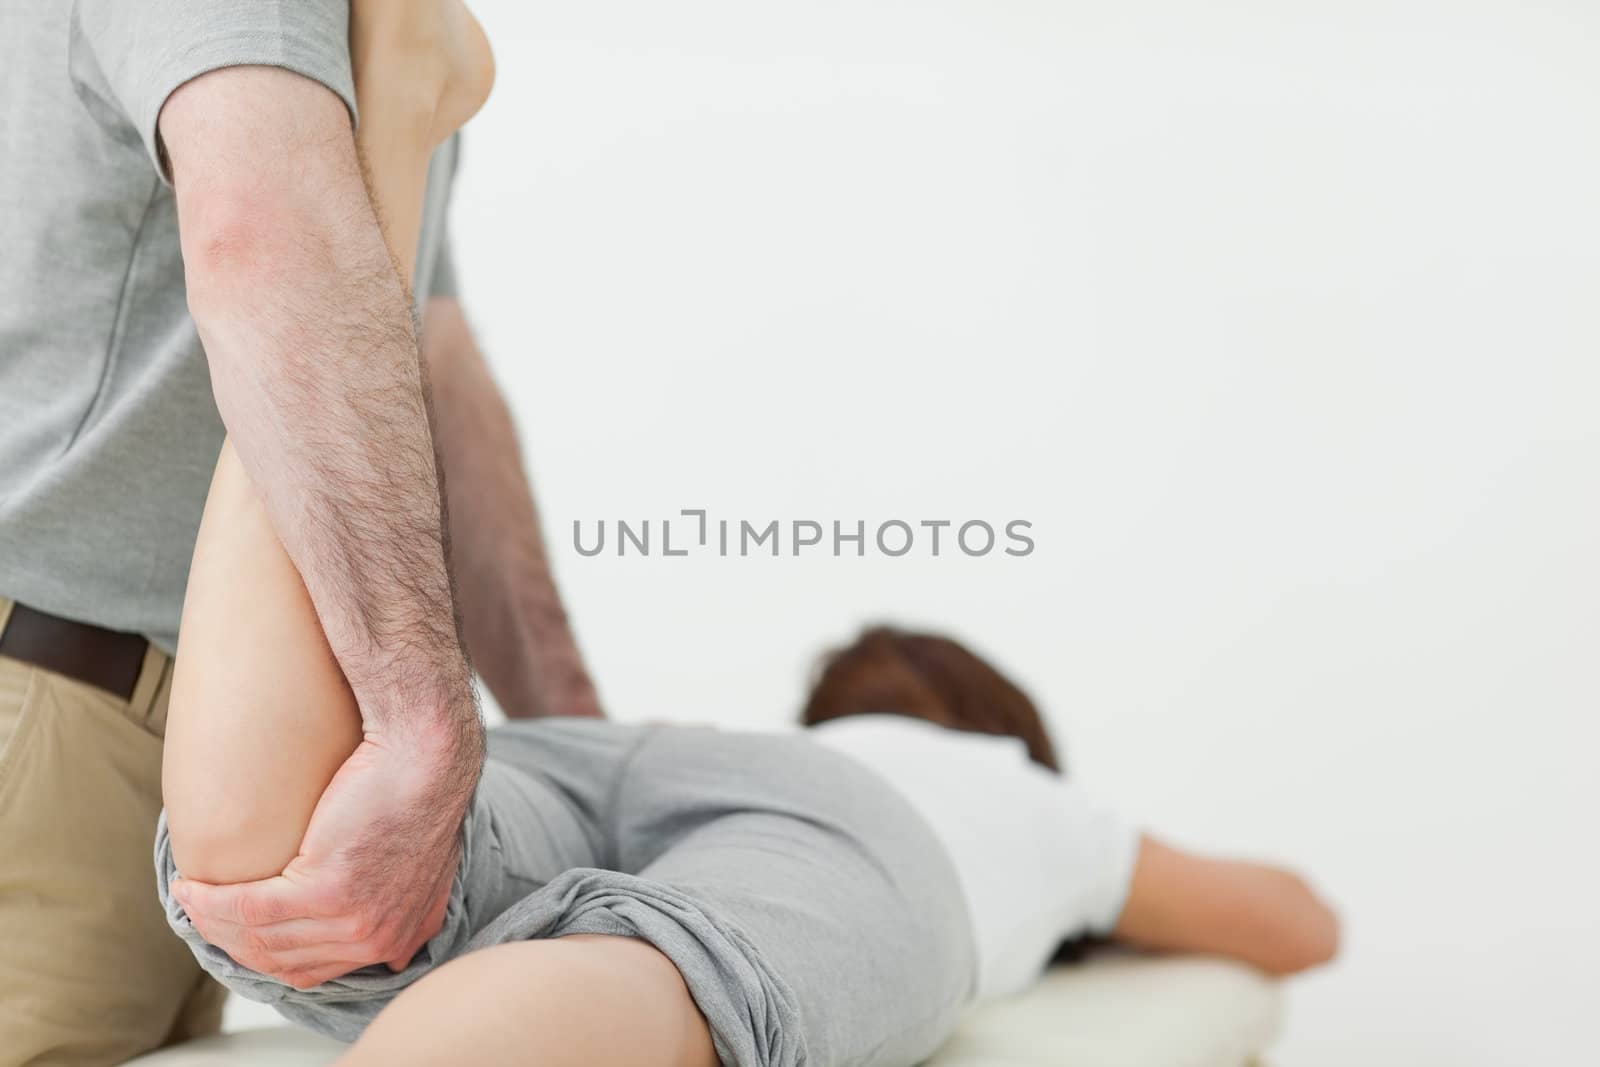 Woman lying forward while a man is stretching her leg in a room